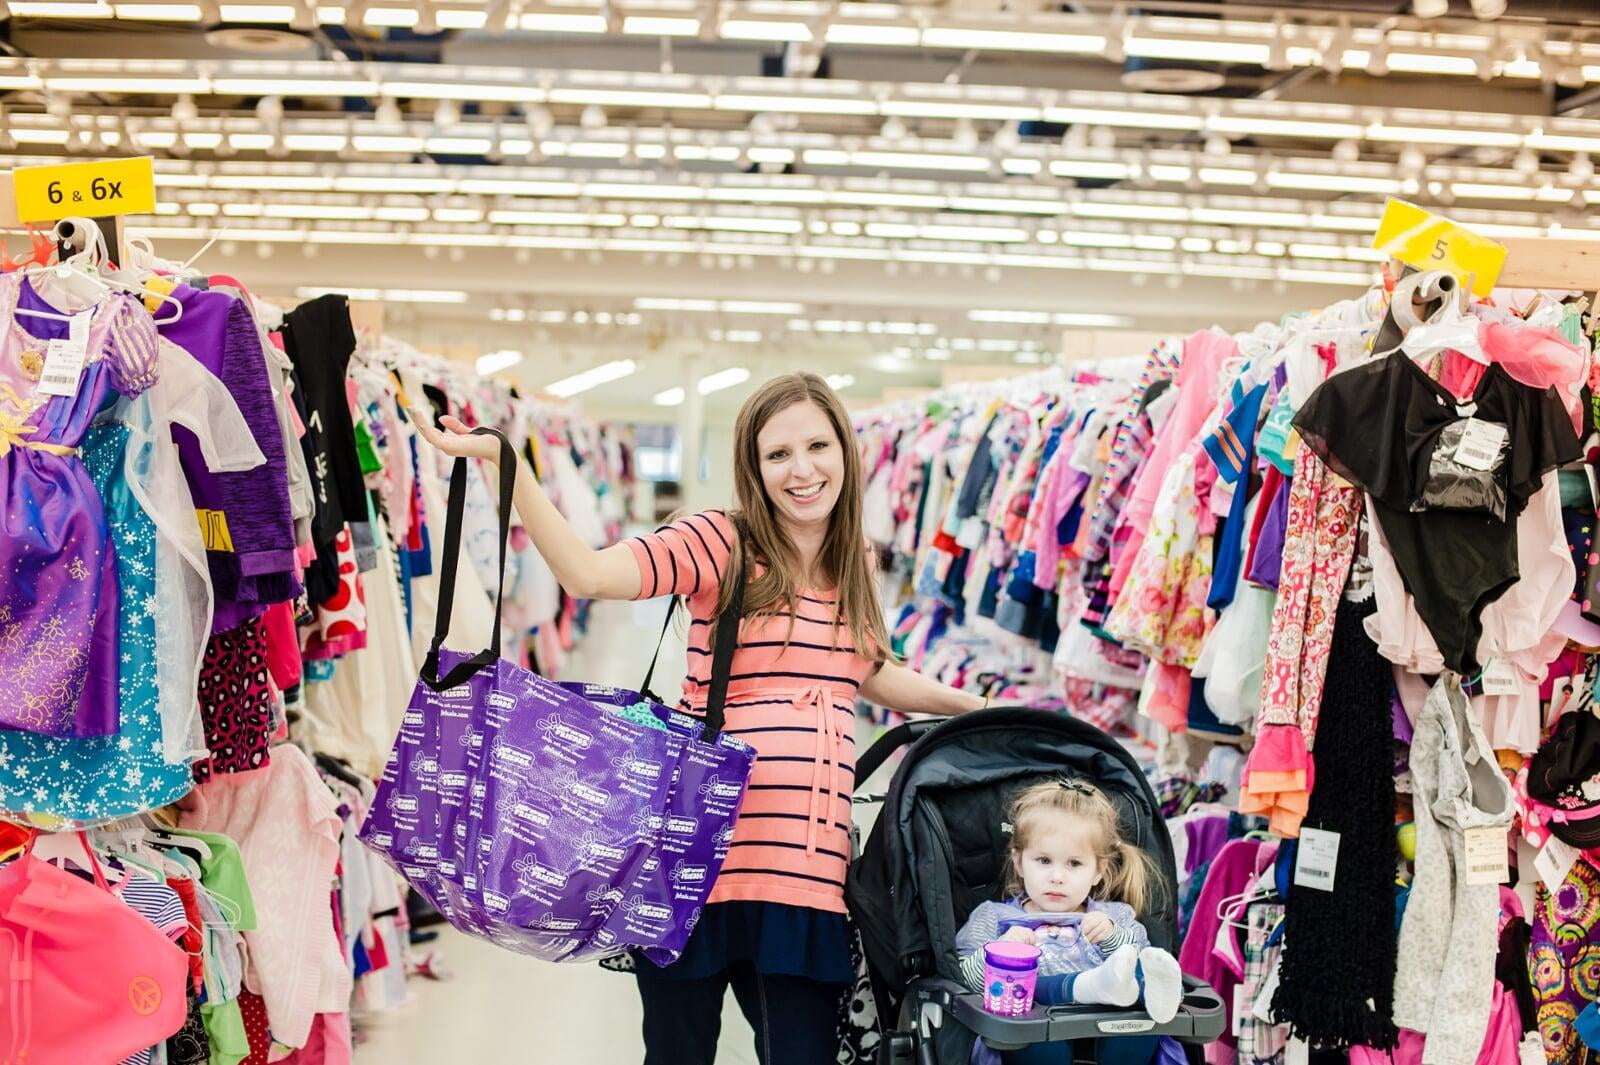 A Mom holds up her JBF shopping bag with her right hand while resting her left hand on her stroller with toddler daughter inside.